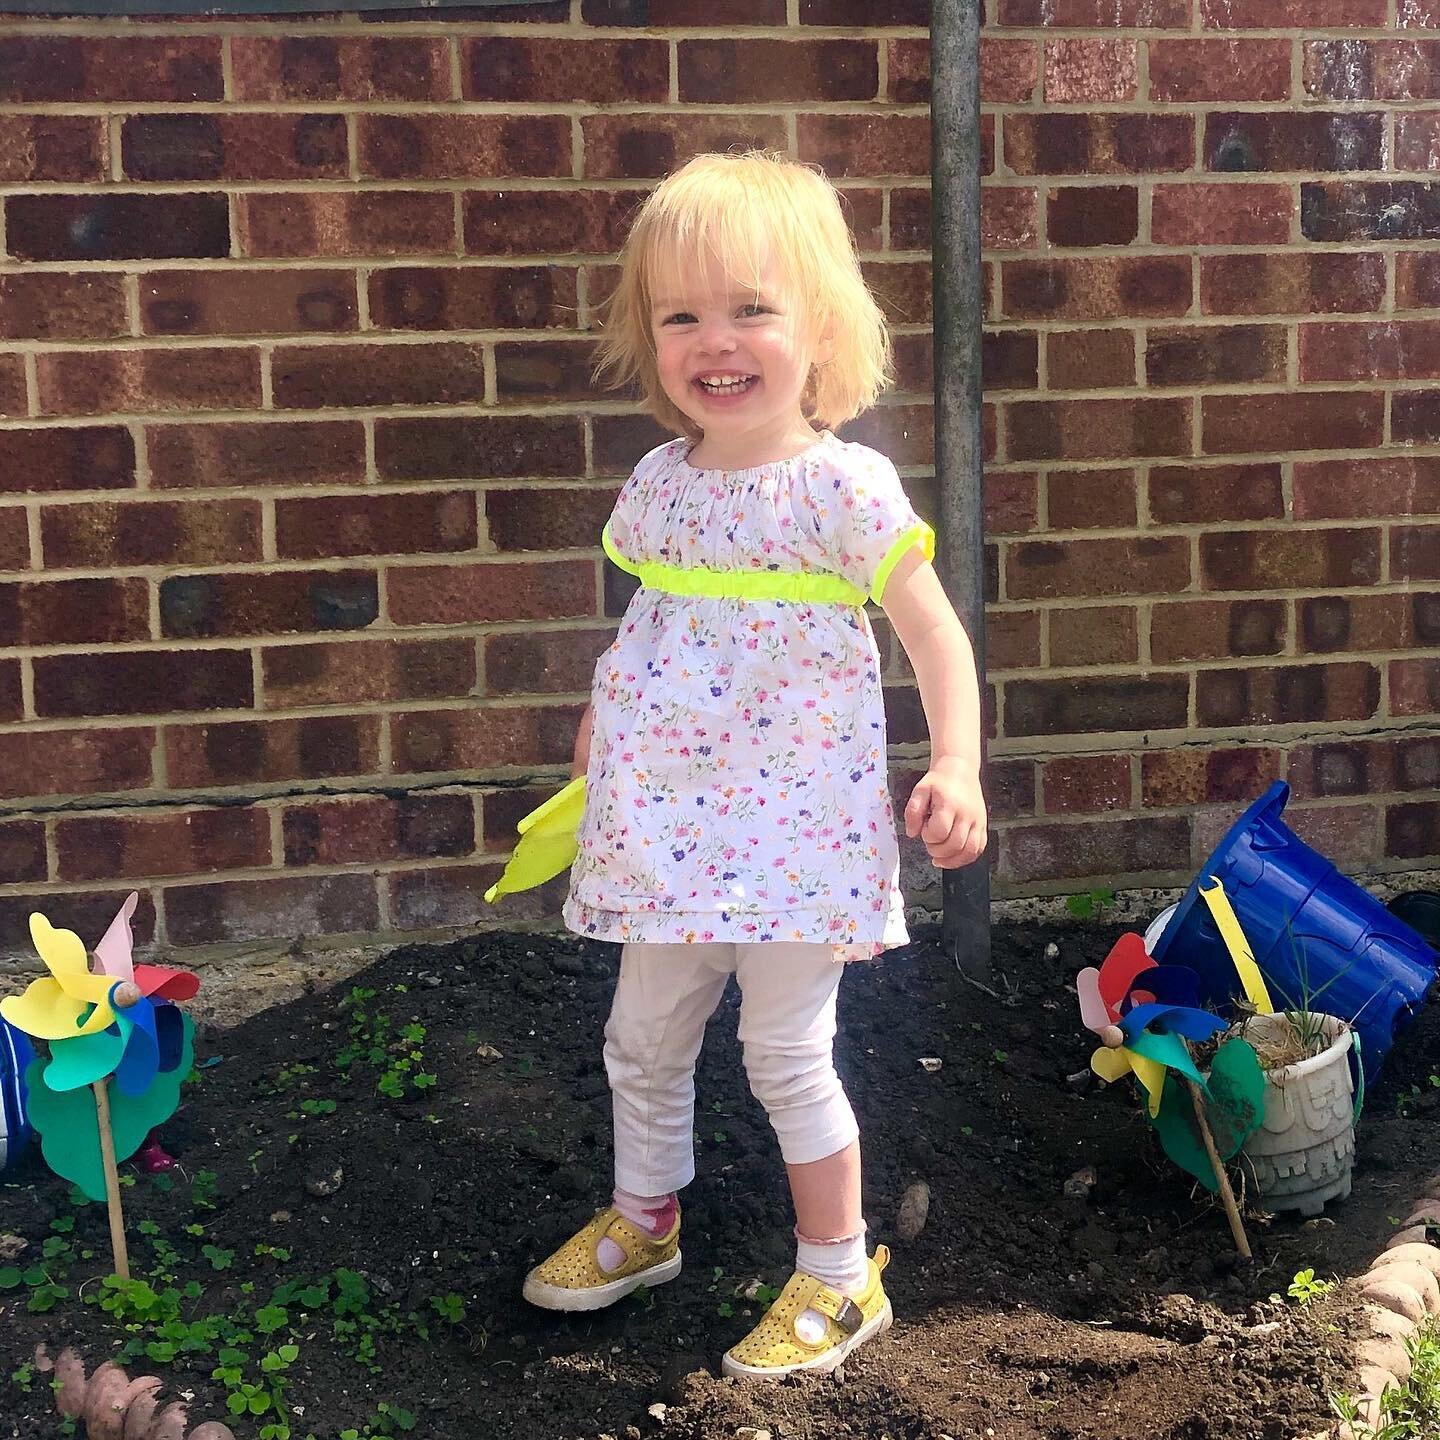 Summer is certainly here and what better to do than muck about with a spot of gardening in her favourite dress! Spot the matching spade ☀️
We&rsquo;re going to be at the Parson&rsquo;s Green Summer Fair this Saturday from 11-17.30. Come and say hello